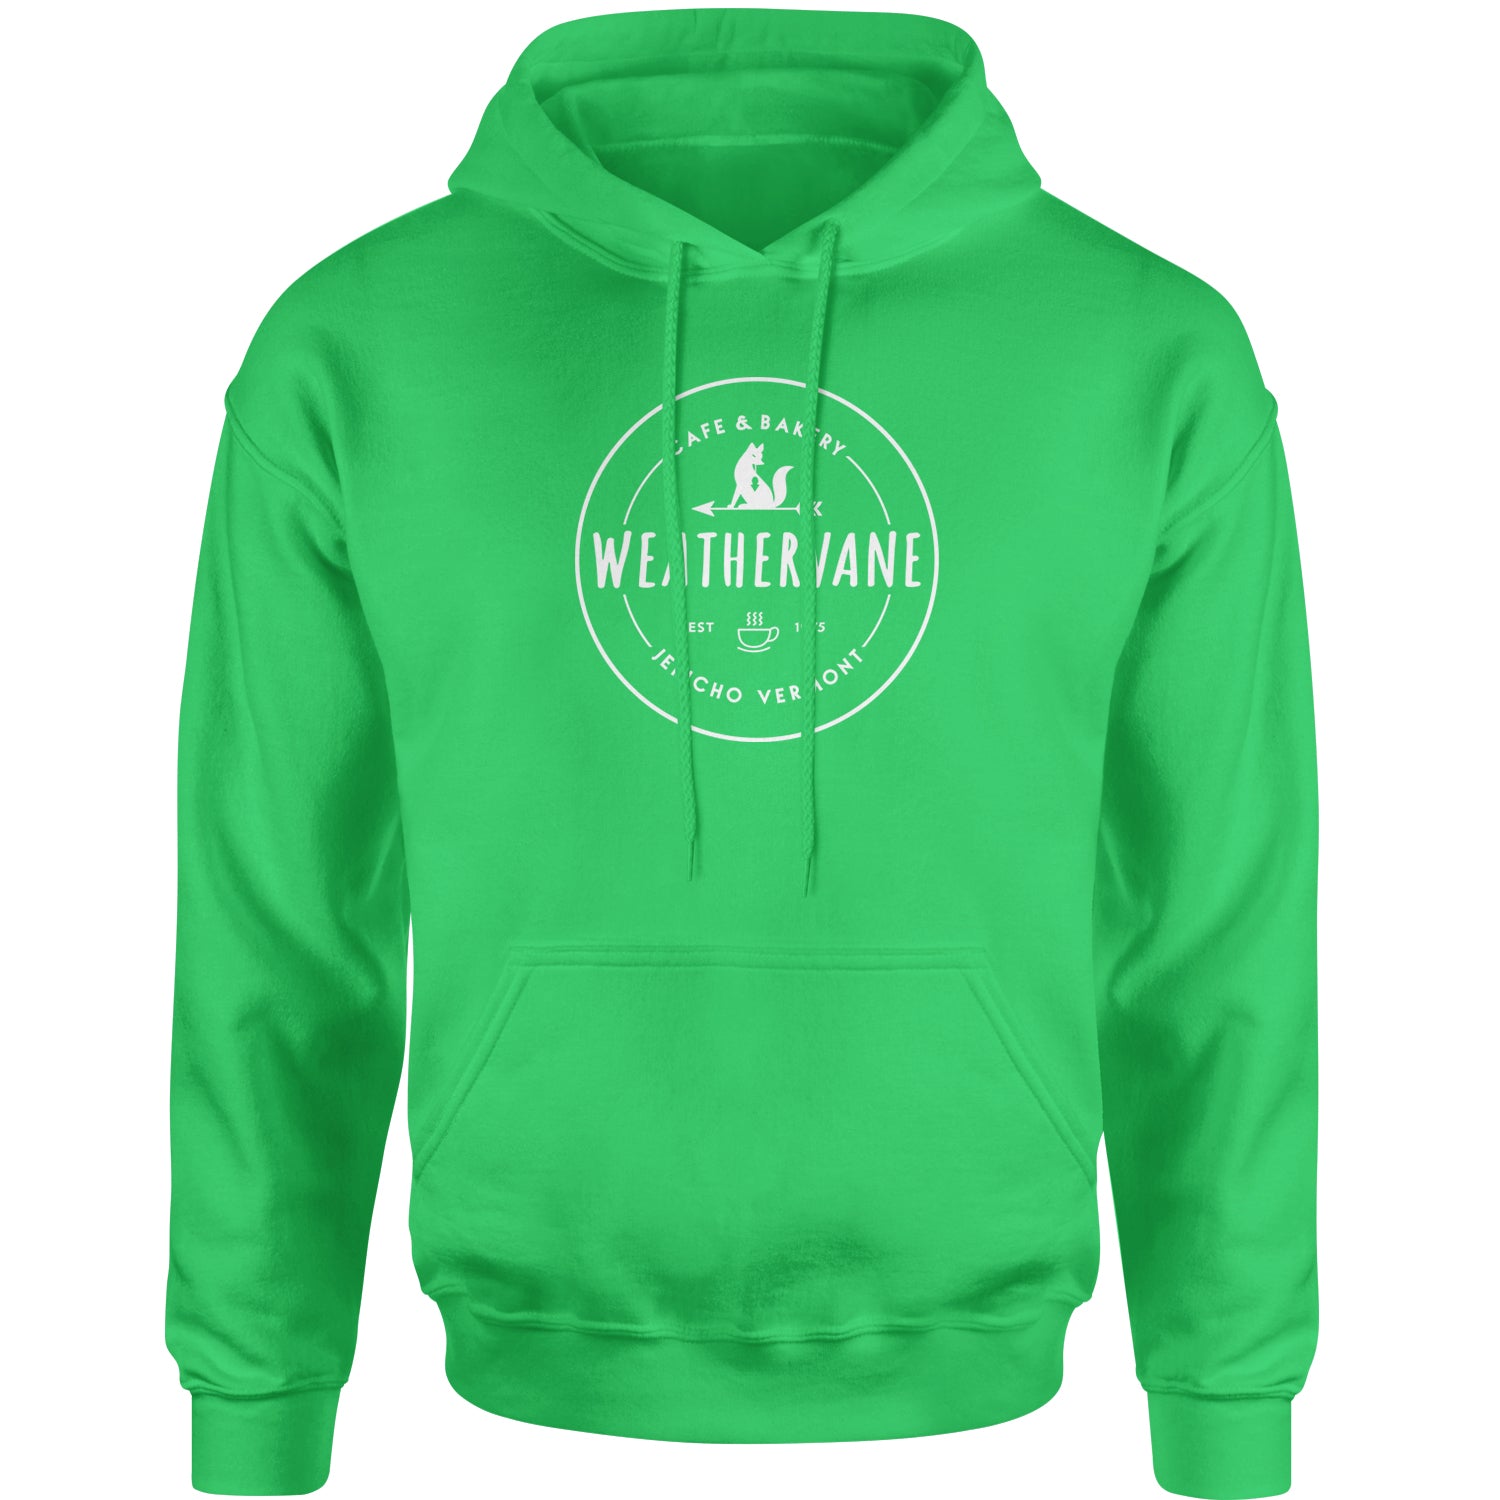 Weathervane Coffee Shop Adult Hoodie Sweatshirt academy, jericho, more, never, vermont, Wednesday by Expression Tees